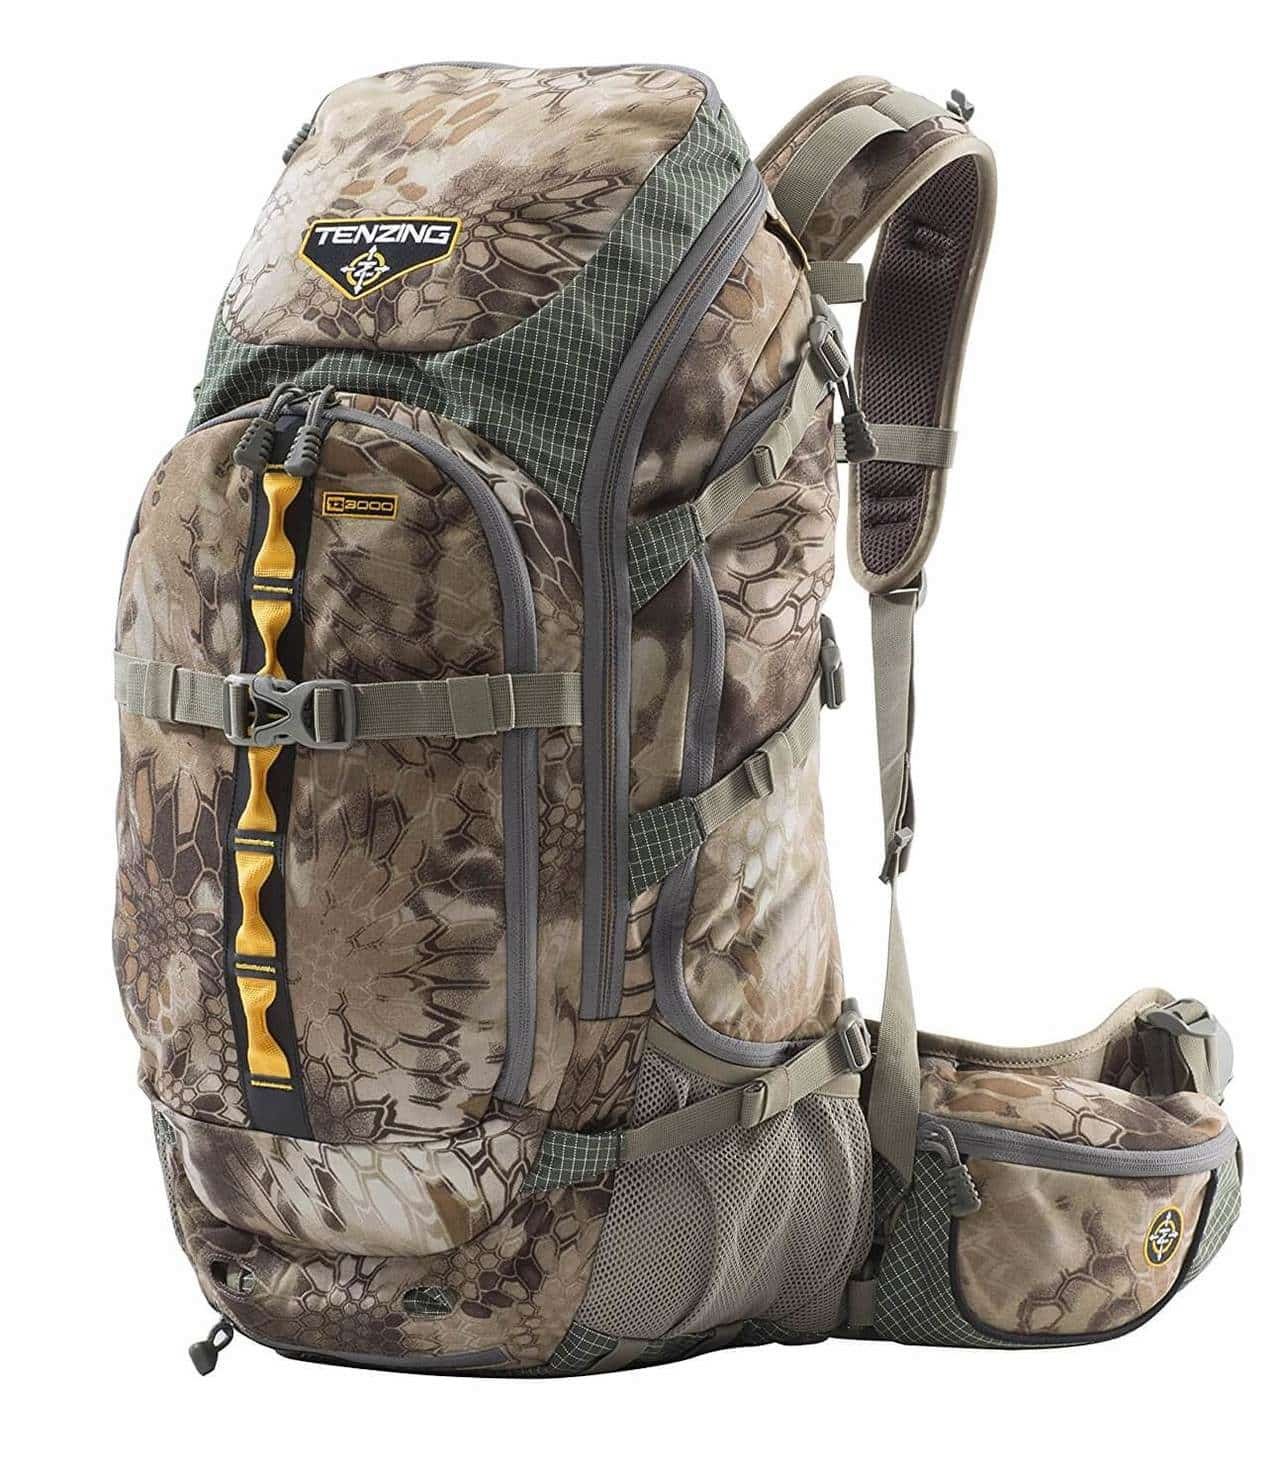 Best Bow Hunting Backpack #7 - Tenzing TZ 3000 Big Game Hunting Backpack - Front View